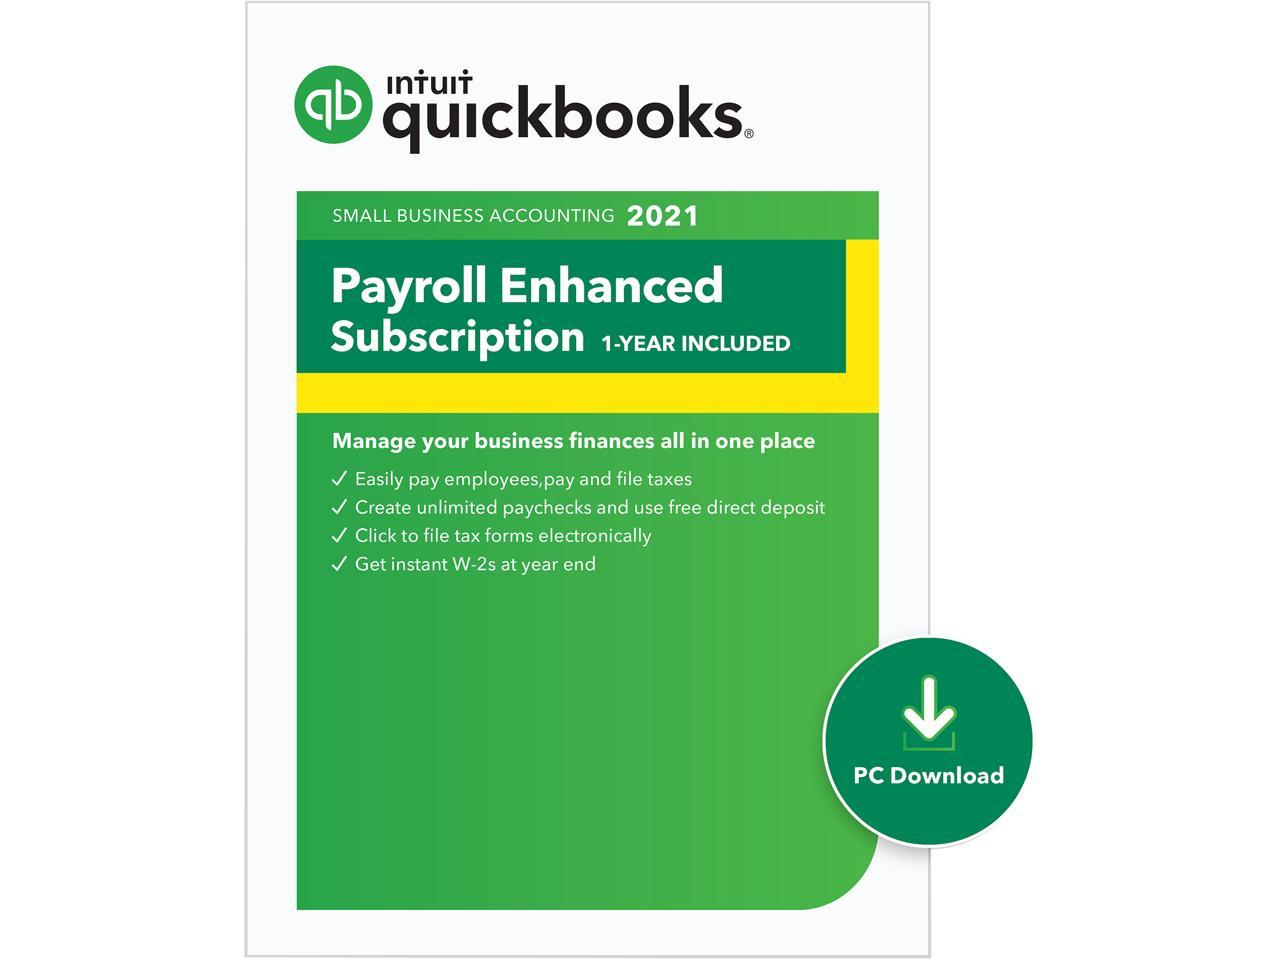 quickbooks payroll service for accountants